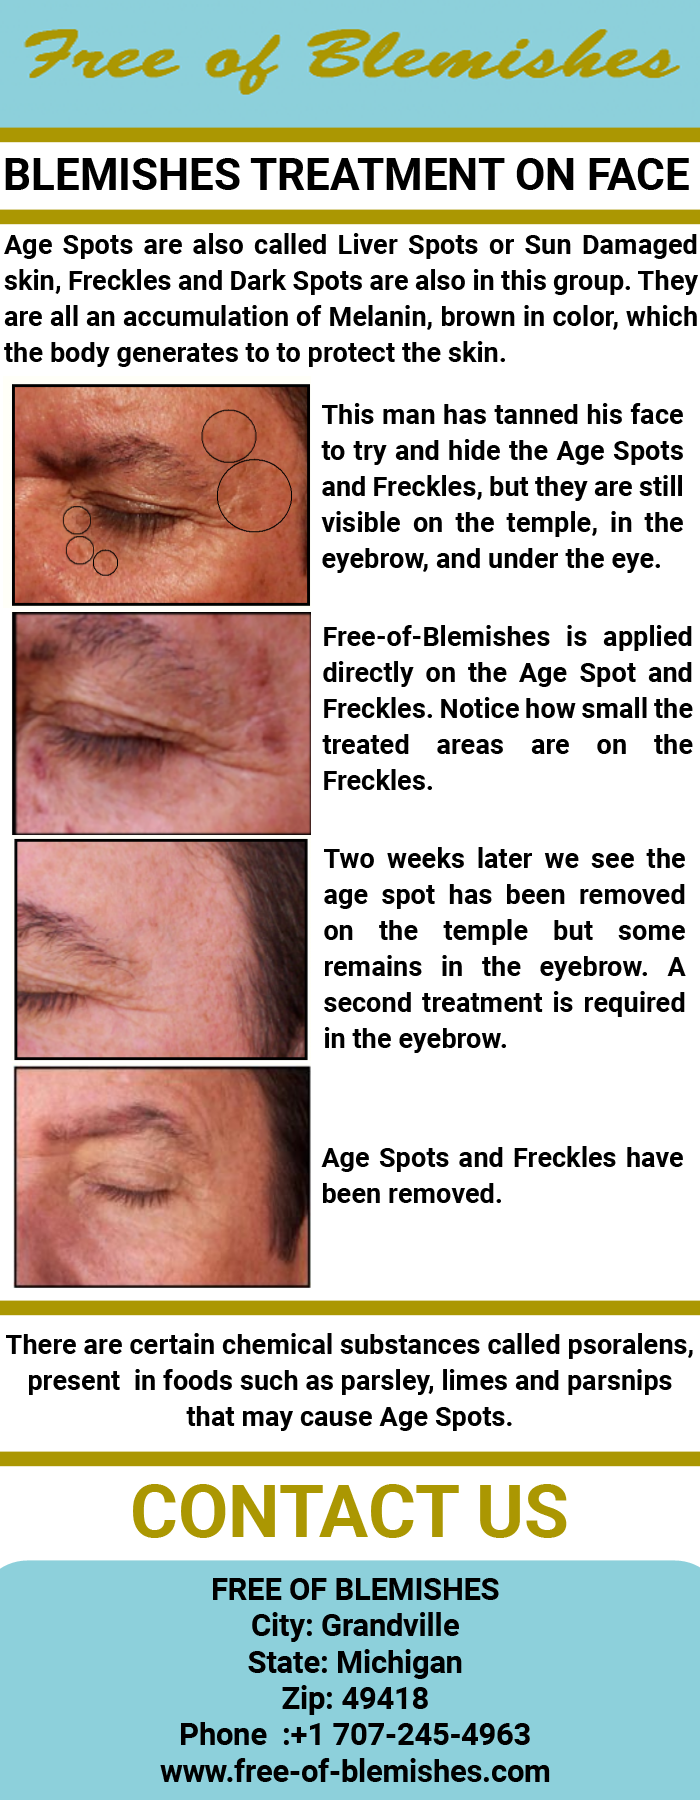 Blemishes treatment on face  by freeofblemishes